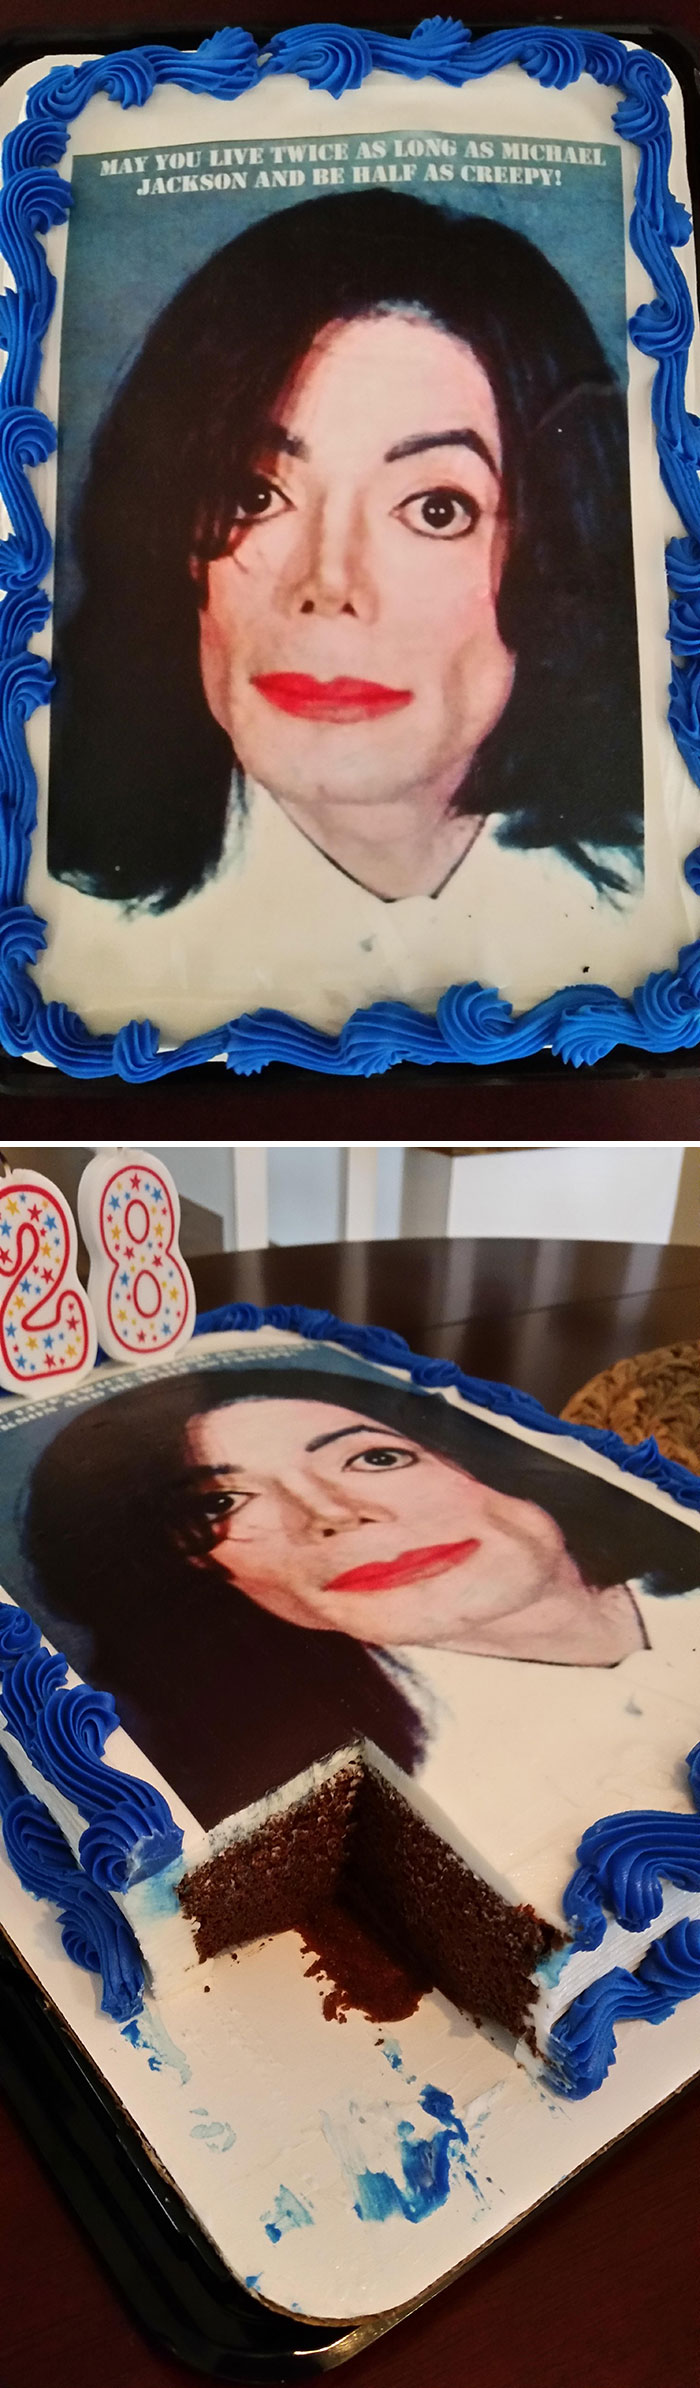 My Wife And I Have A Competition In Who Can Get The Other Person The Most Upsetting Cake